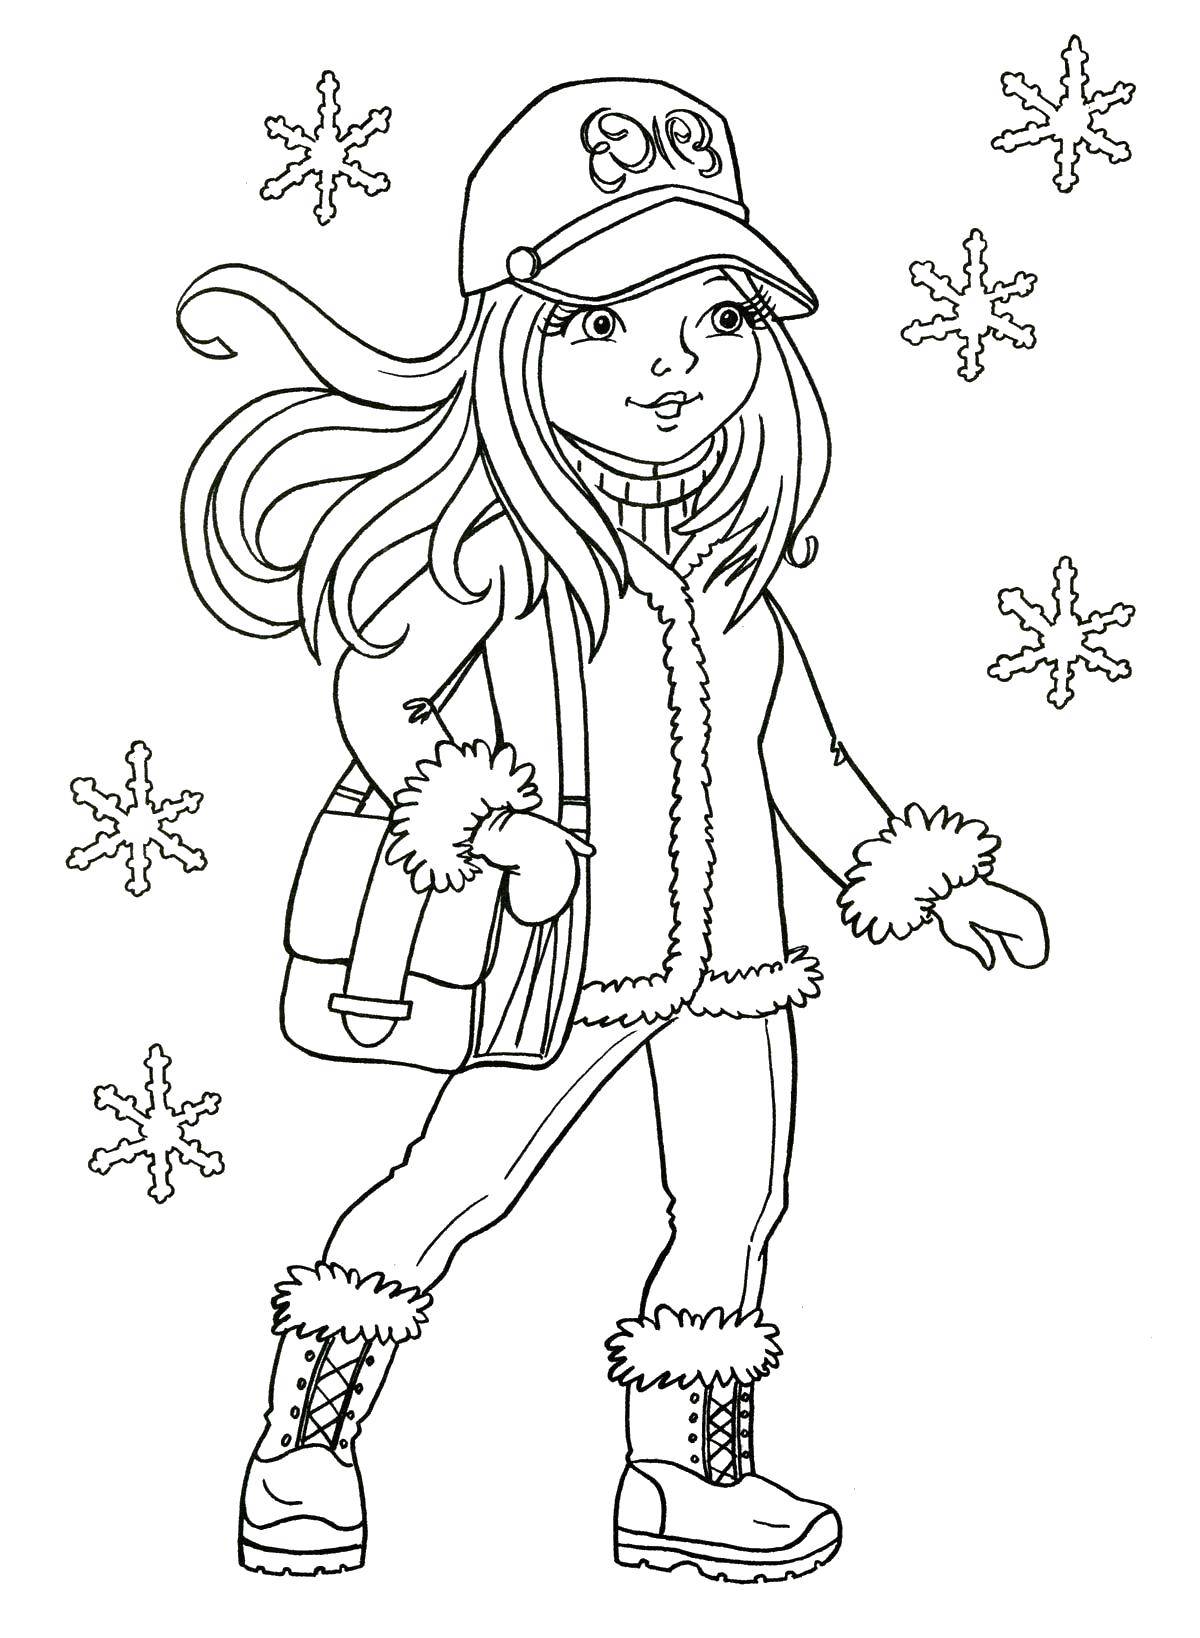 Coloring Girl and snowflakes. Category snowflakes. Tags:  Snowflakes, snow, winter.